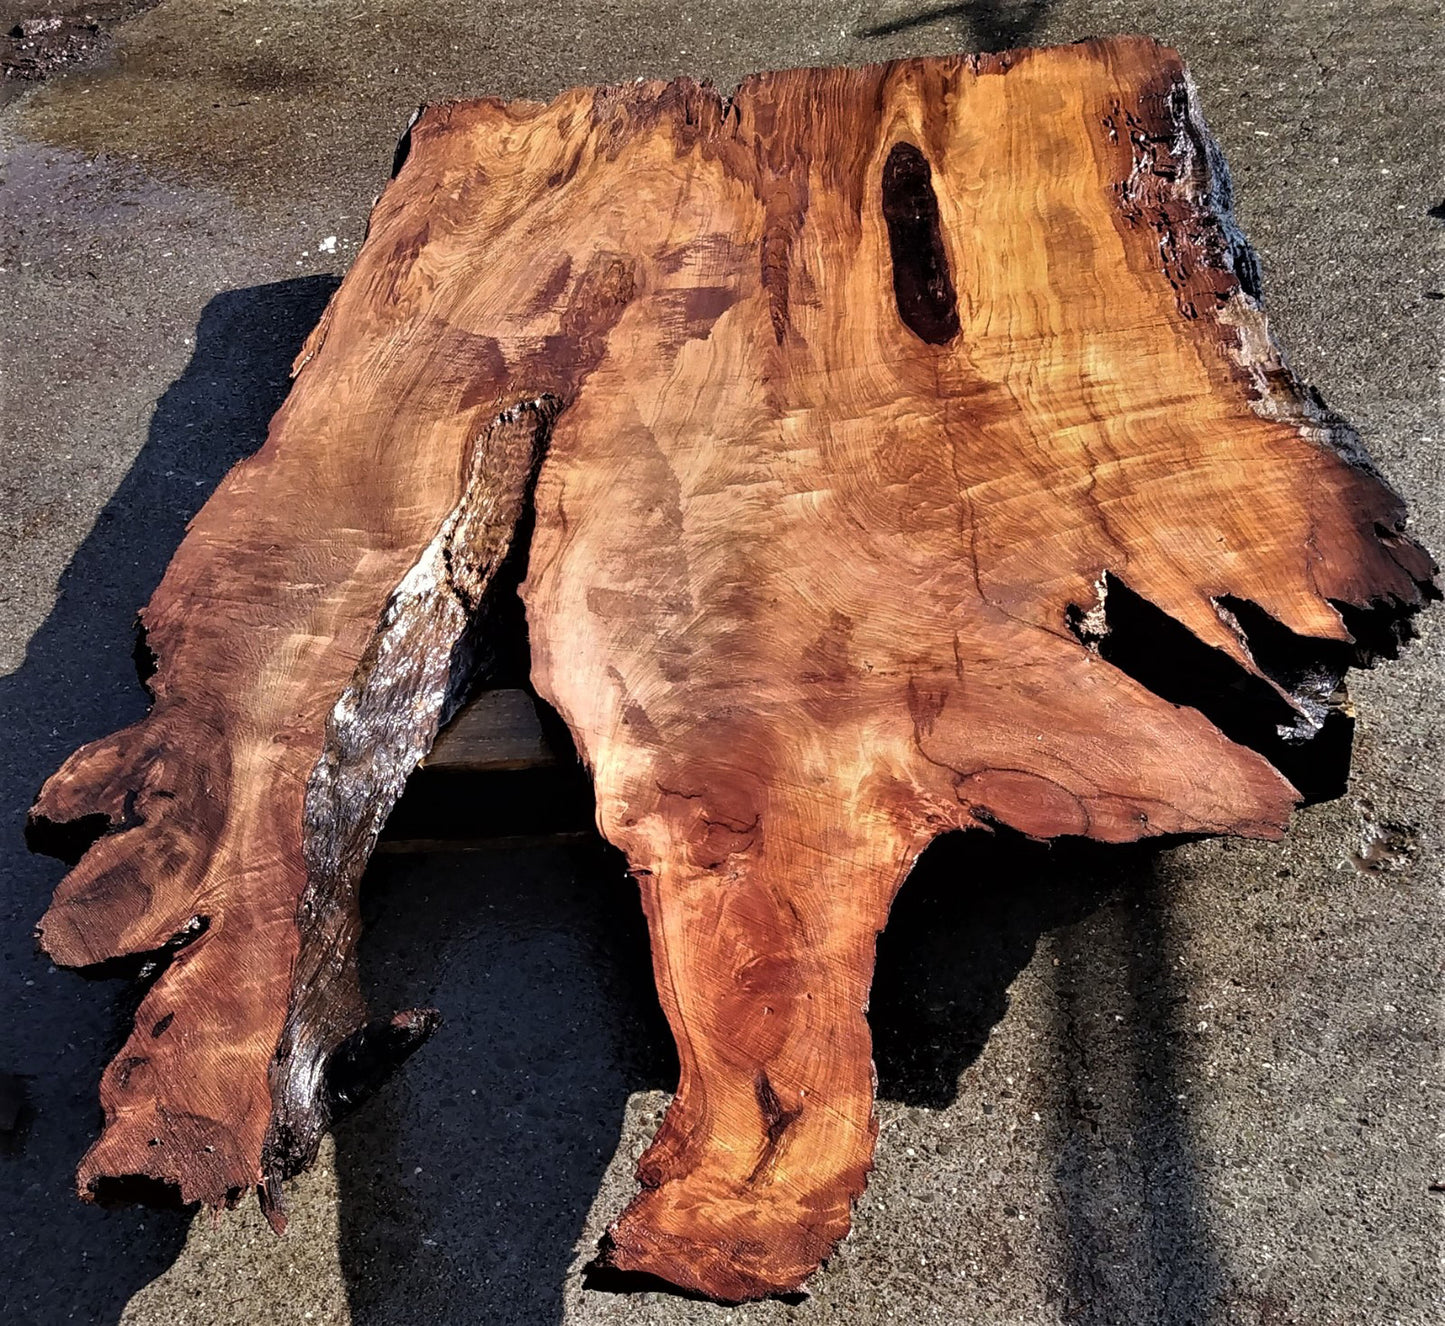 live edge slab | river tables | old growth redwood | craft woods | bsz1634